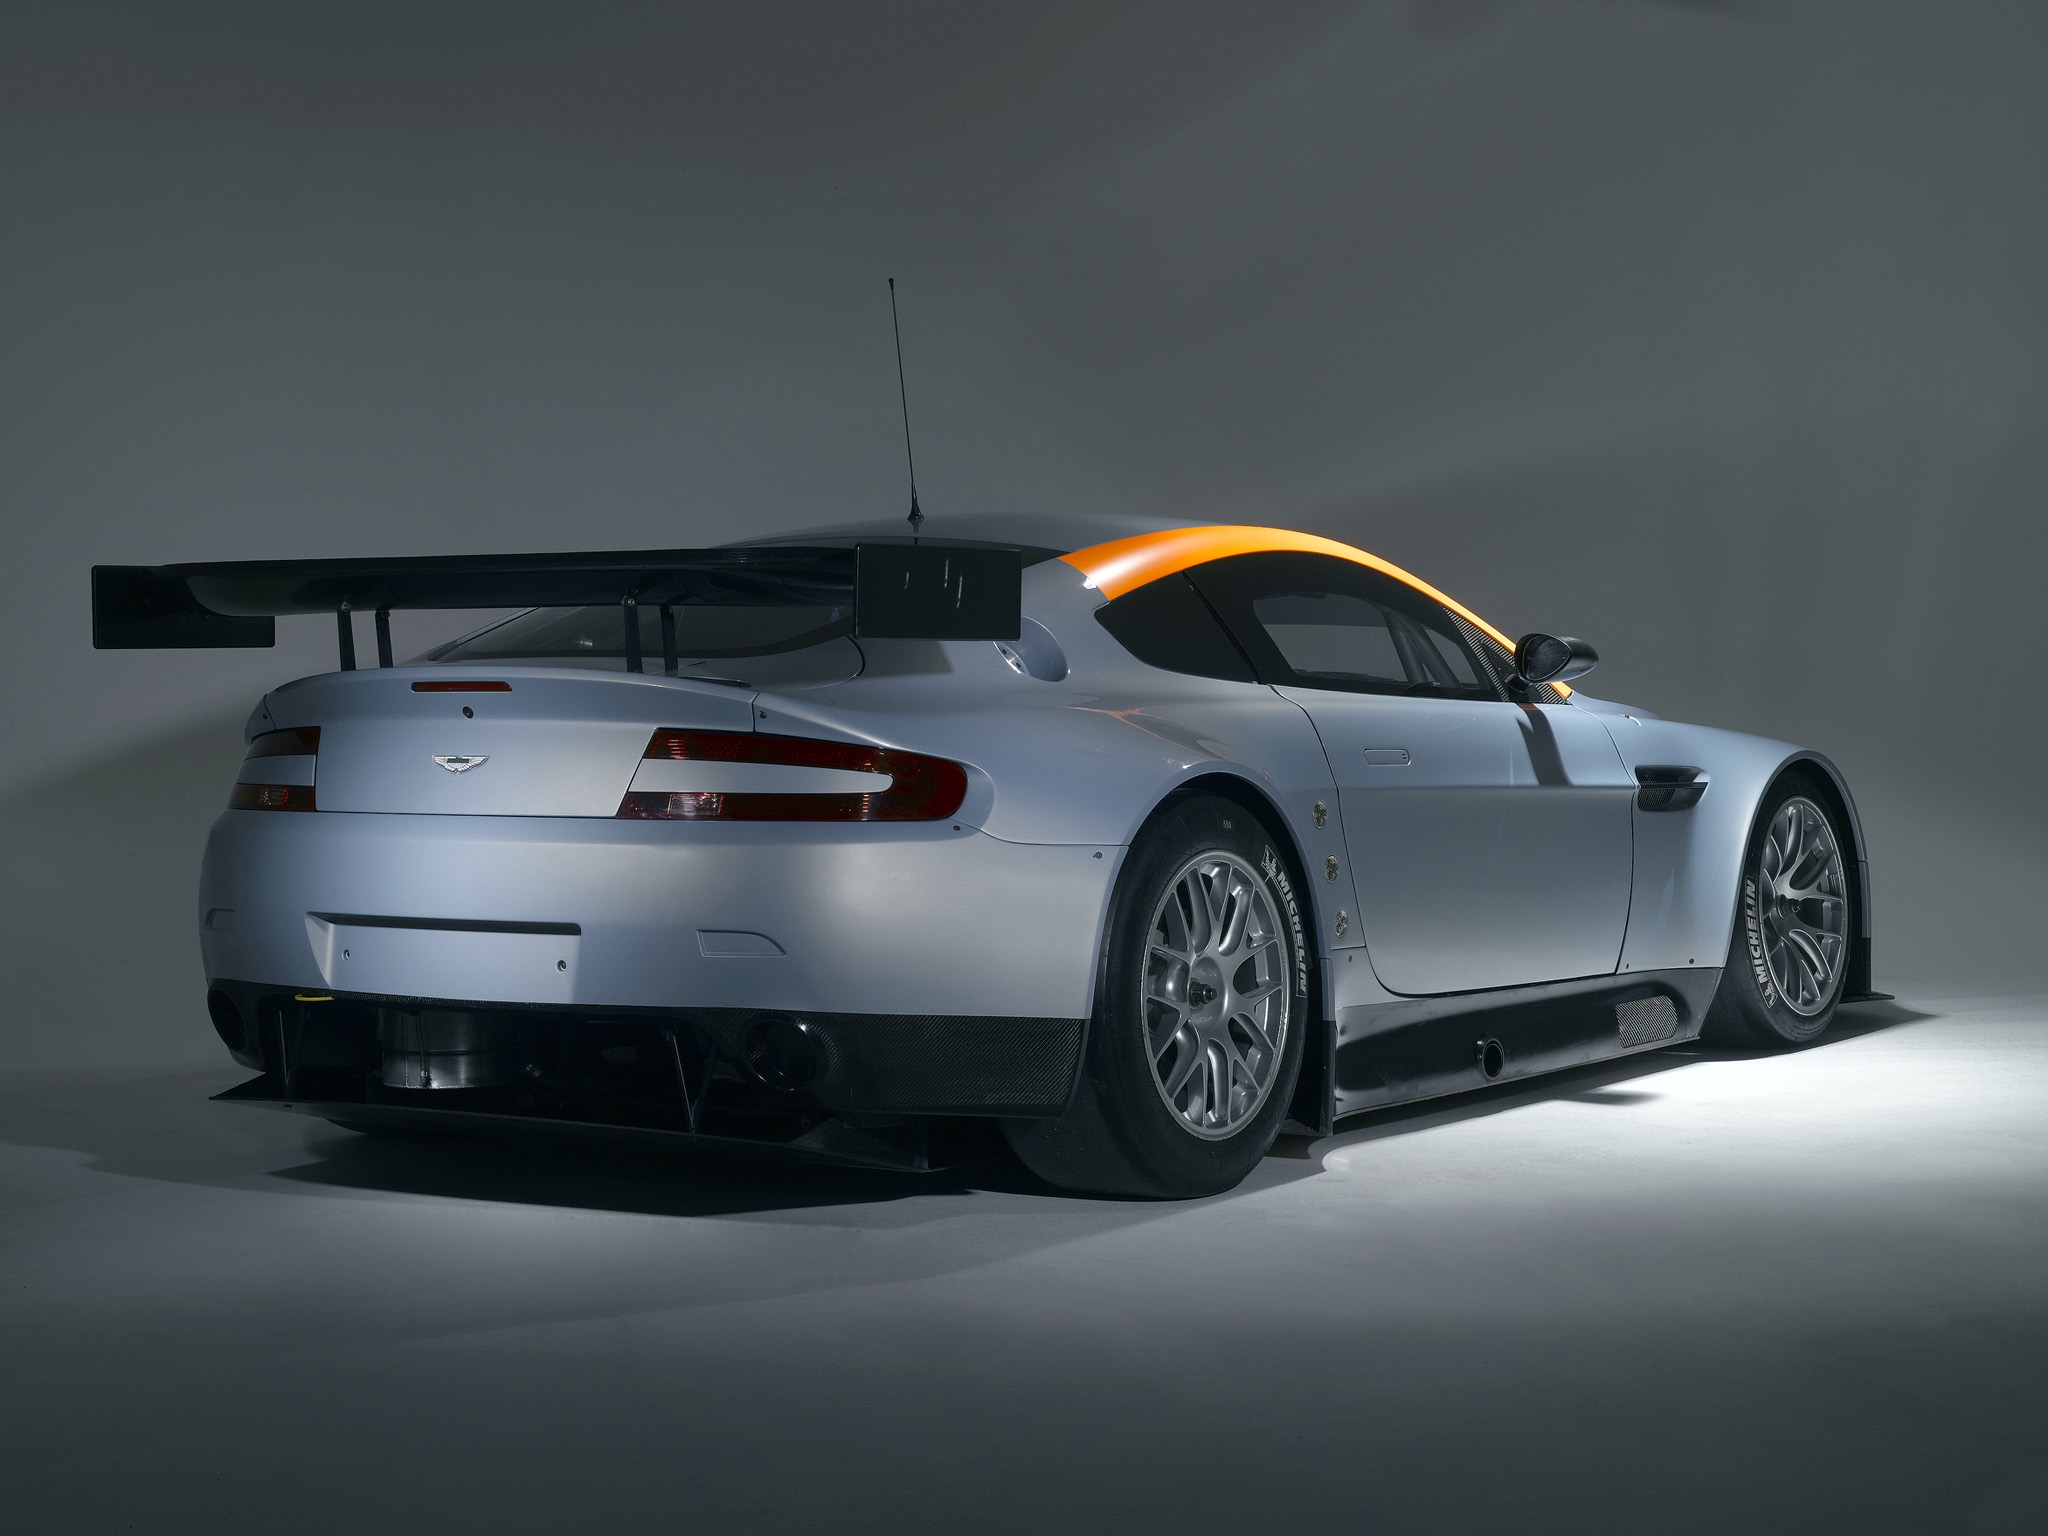 back view, cars, aston martin, grey, rear view, style, 2008, v8, vantage wallpaper for mobile